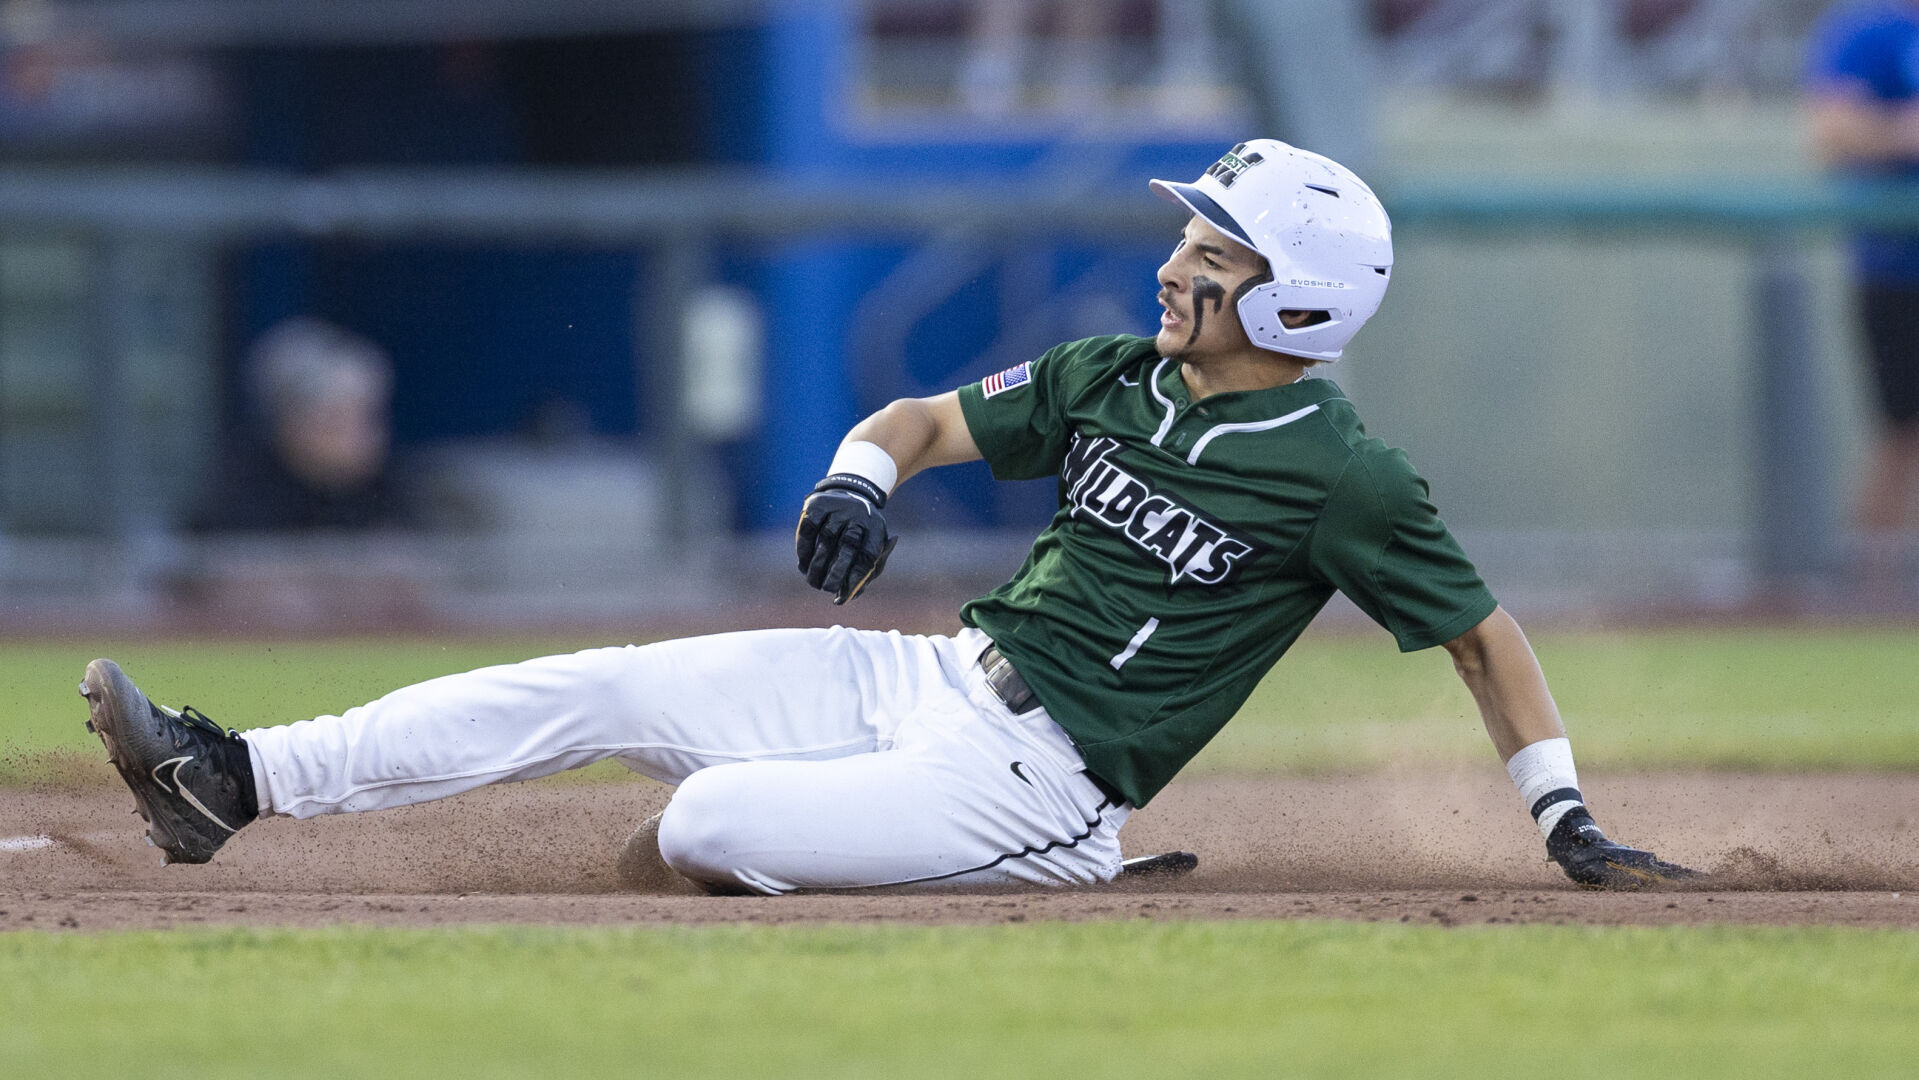 State baseball: Millard West tops Lincoln East in Class A championship game